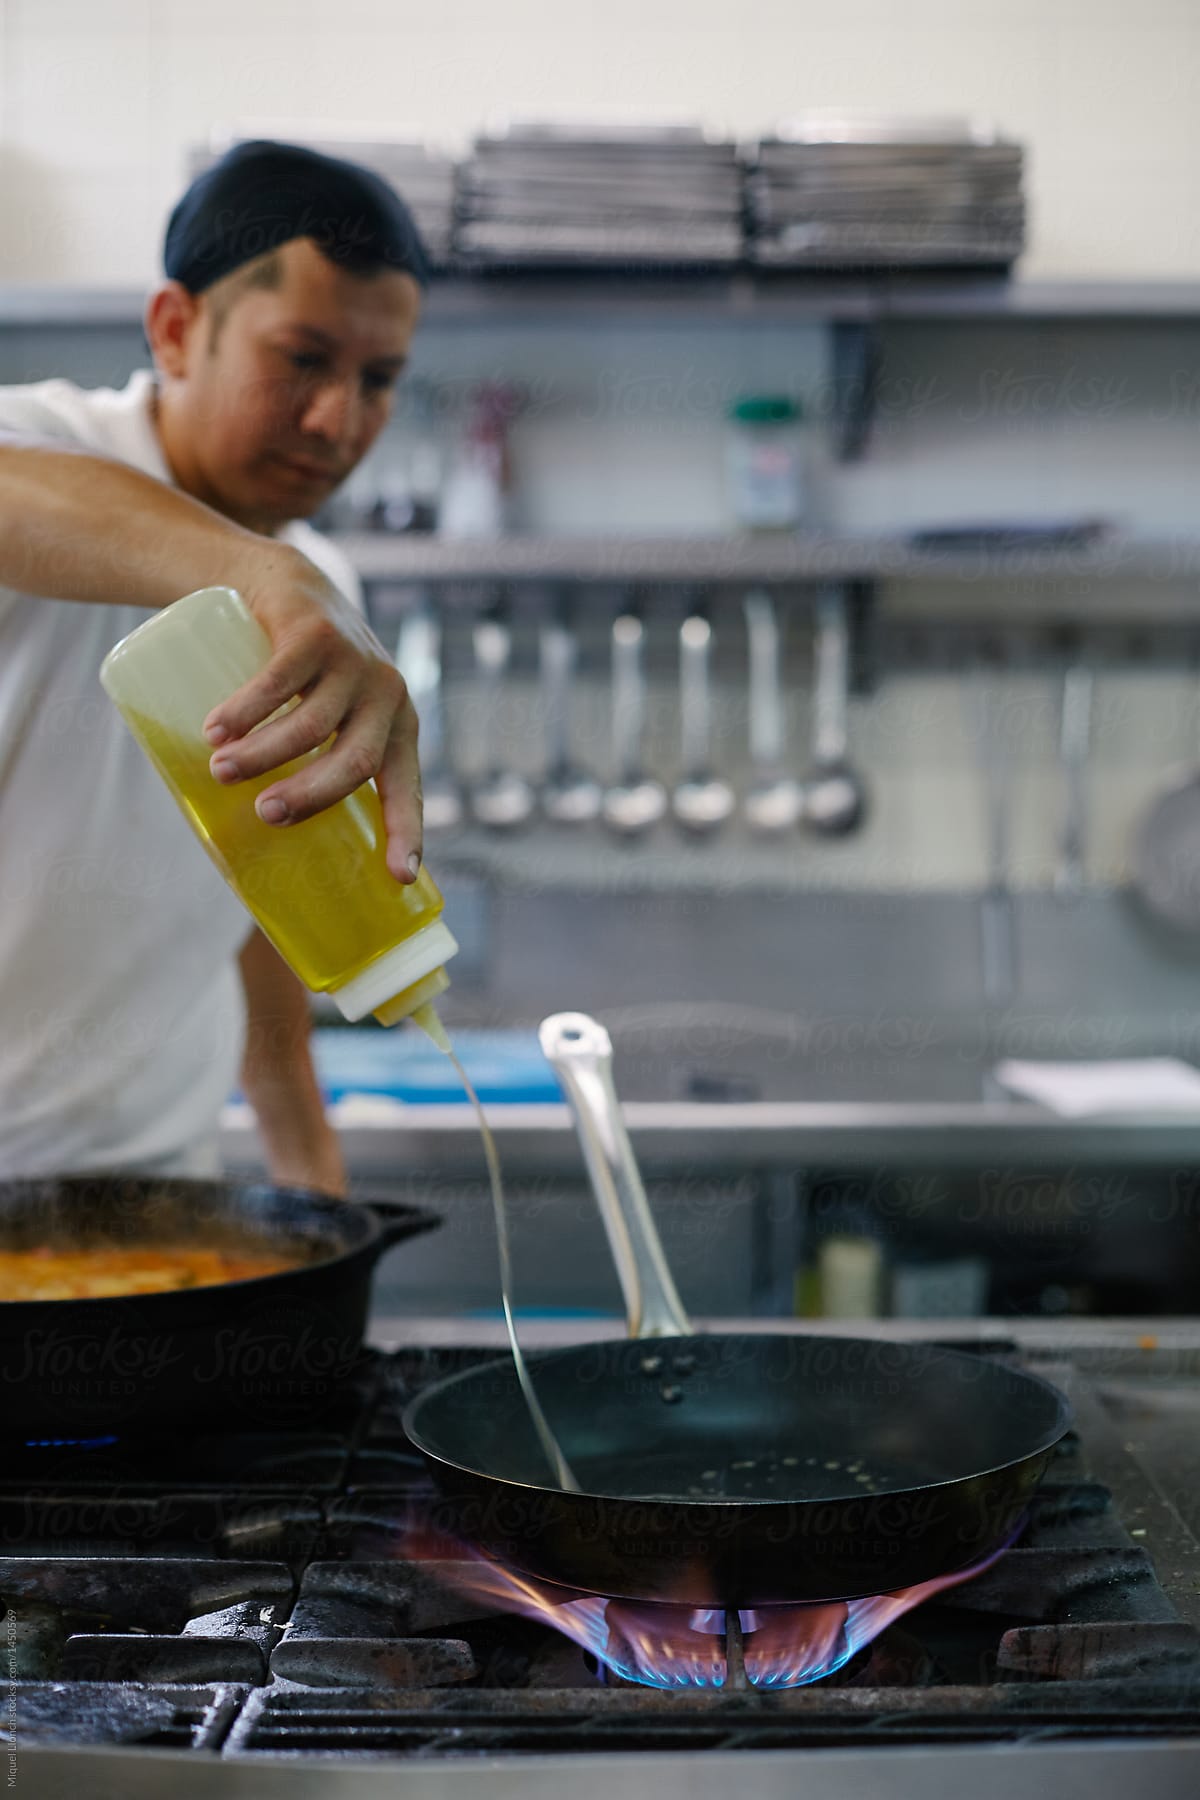 Professional cook adding oil to frying pan on the burner